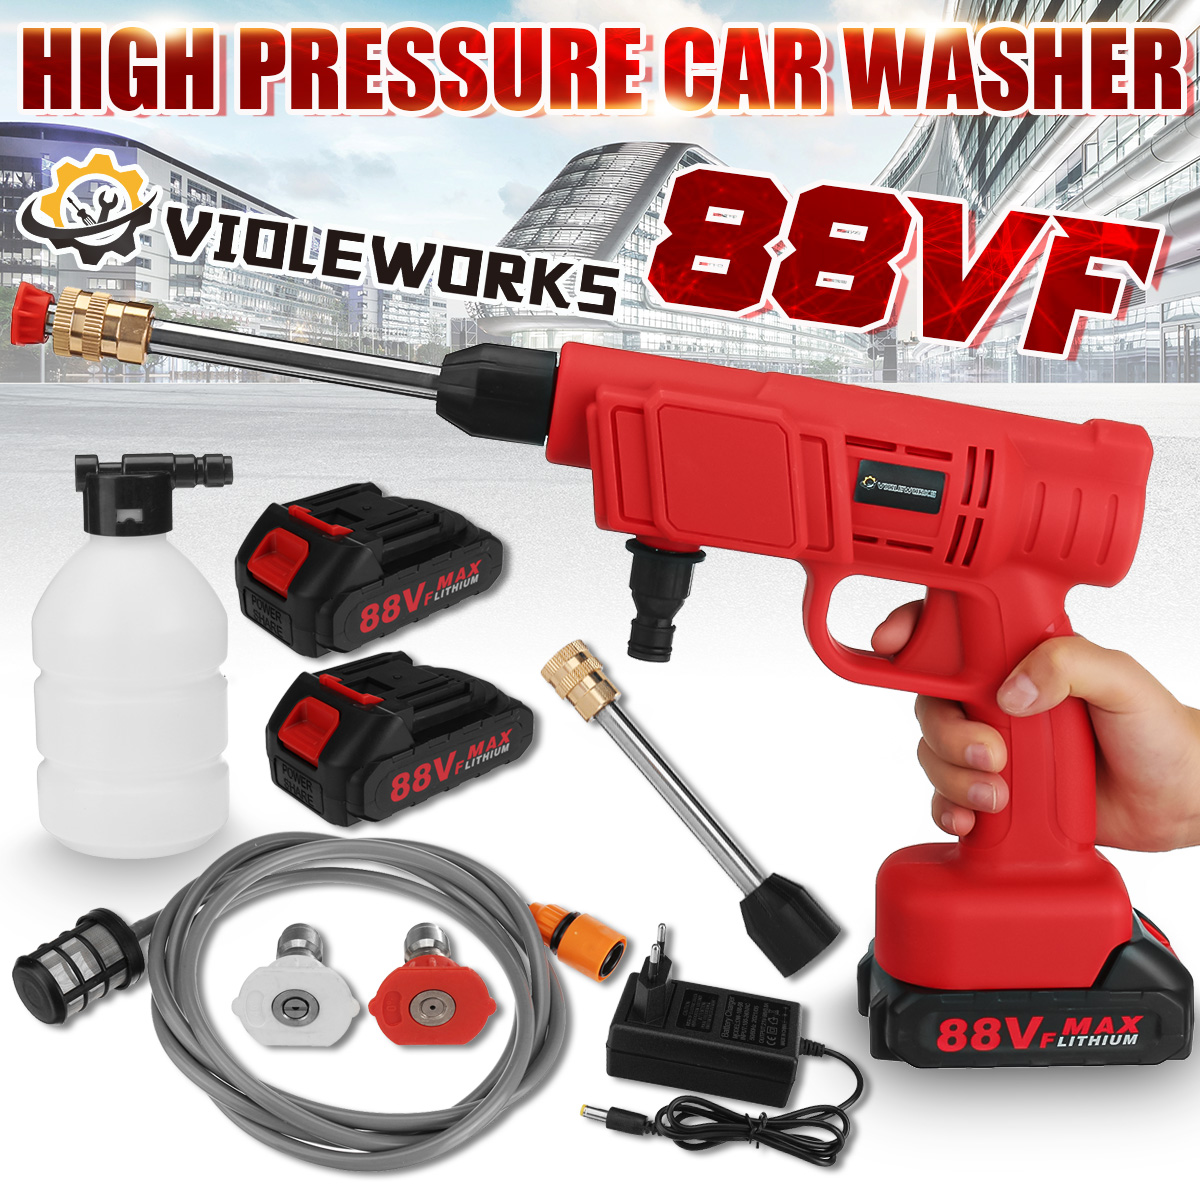 VIOLEWORKS-88VF-Cordless-High-Pressure-Washer-Car-Washing-Spray-Guns-Water-Cleaner-W-None12-Battery-1859075-1